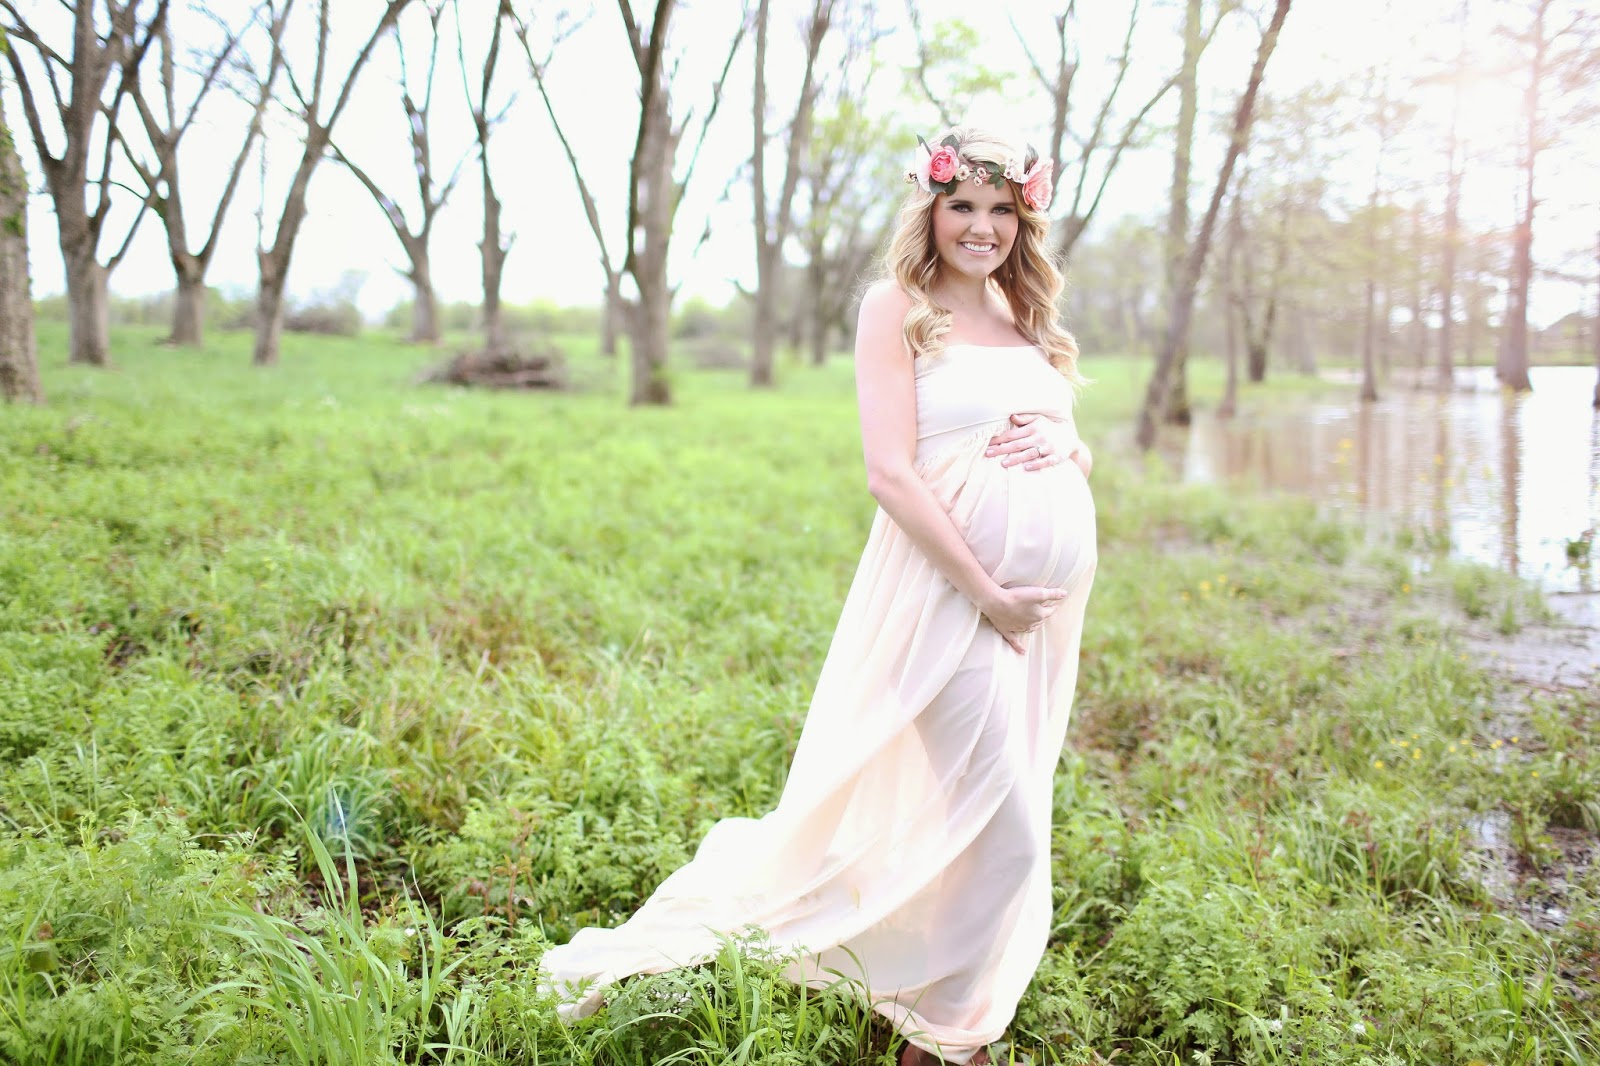 Southern Shutter Photography: Lanie Hesson Maternity